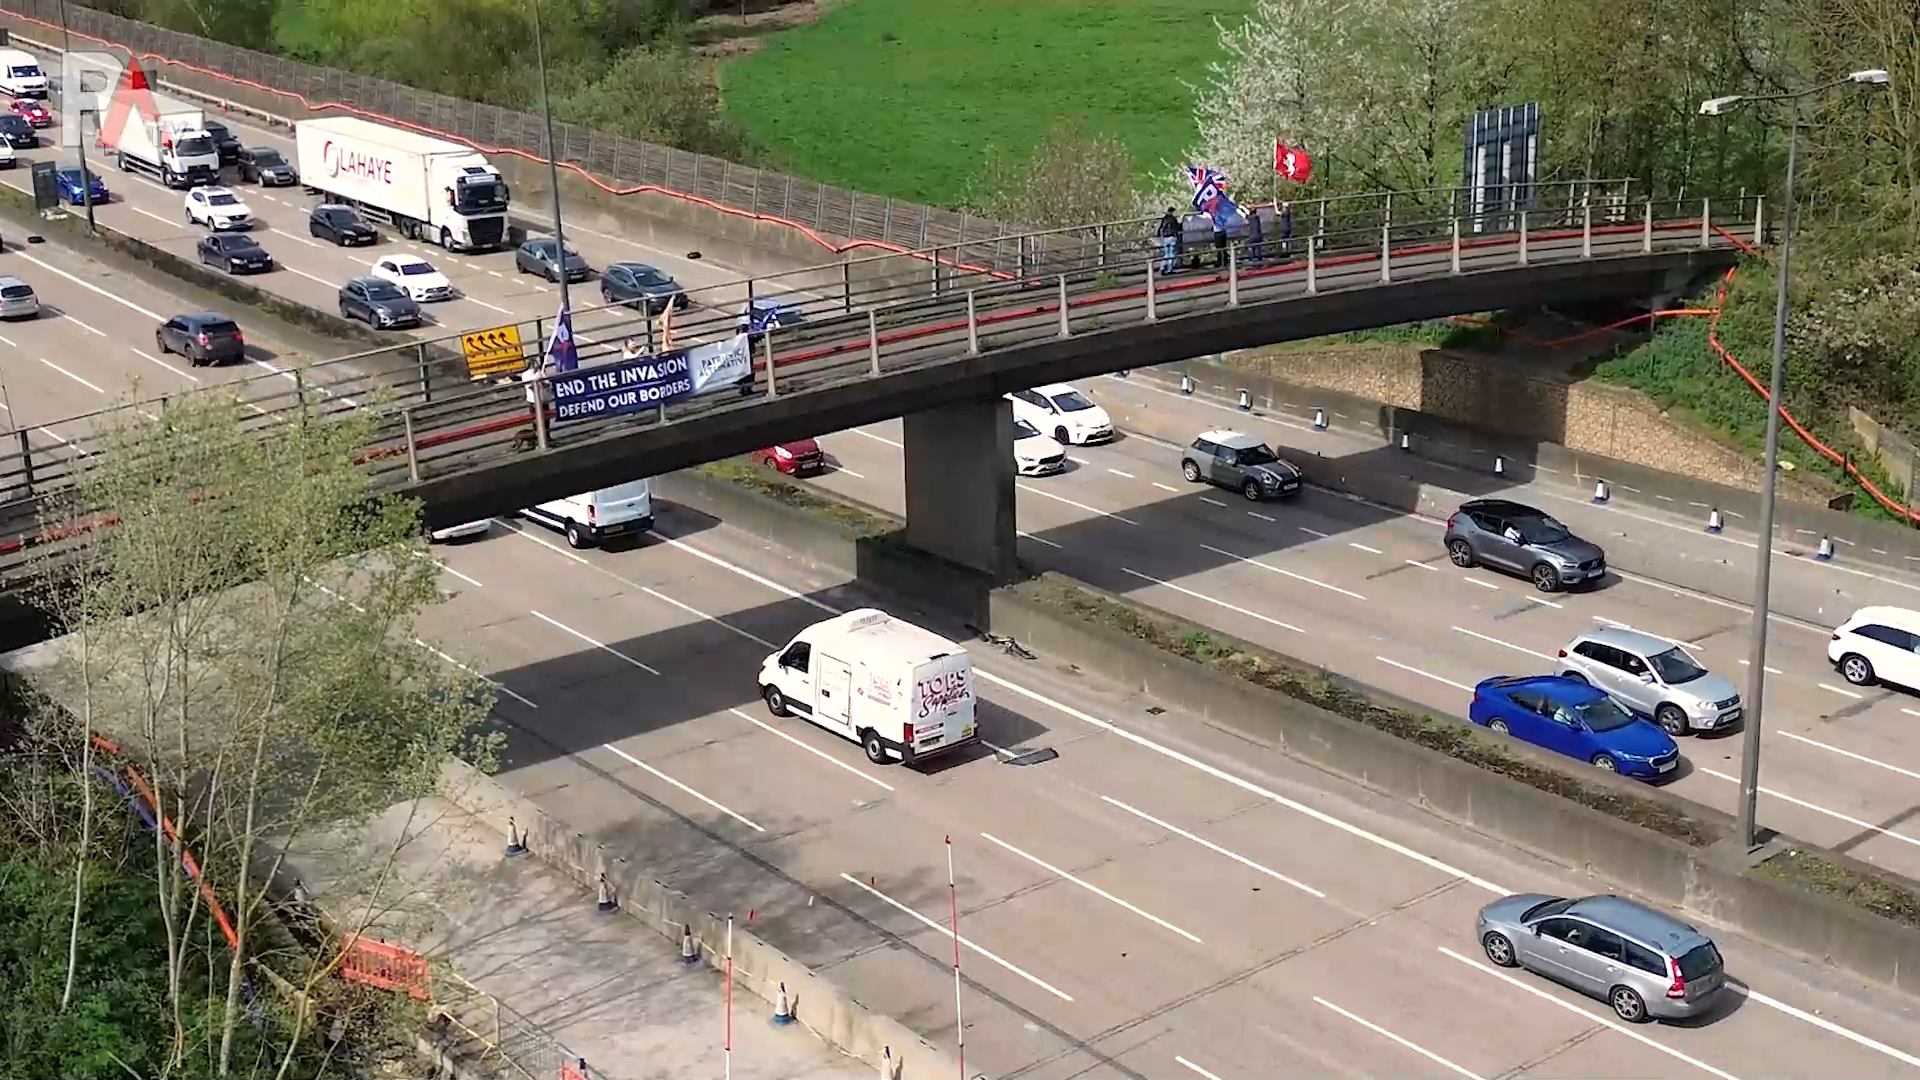 Banner drop over the M25